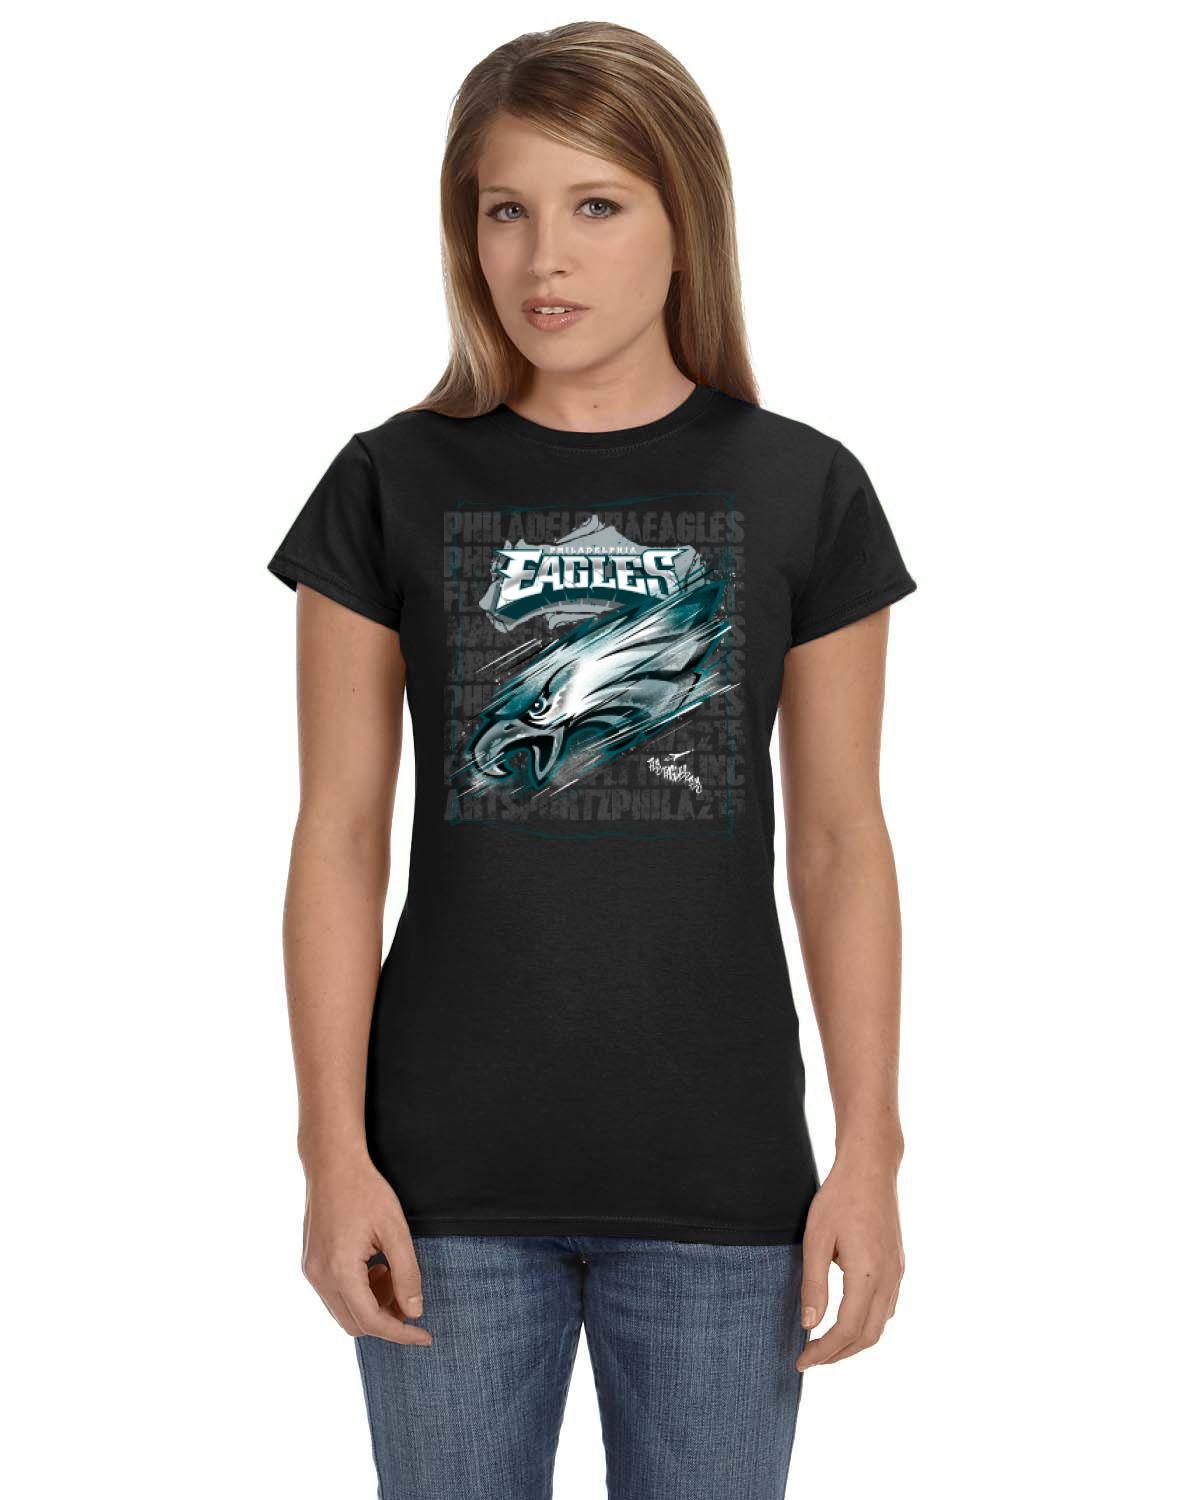 Fly Eagles Fly Ladies Tee (Gildan Ladies' Softstyle 7.5 oz./lin. yd. Fitted T-Shirt | G640L)